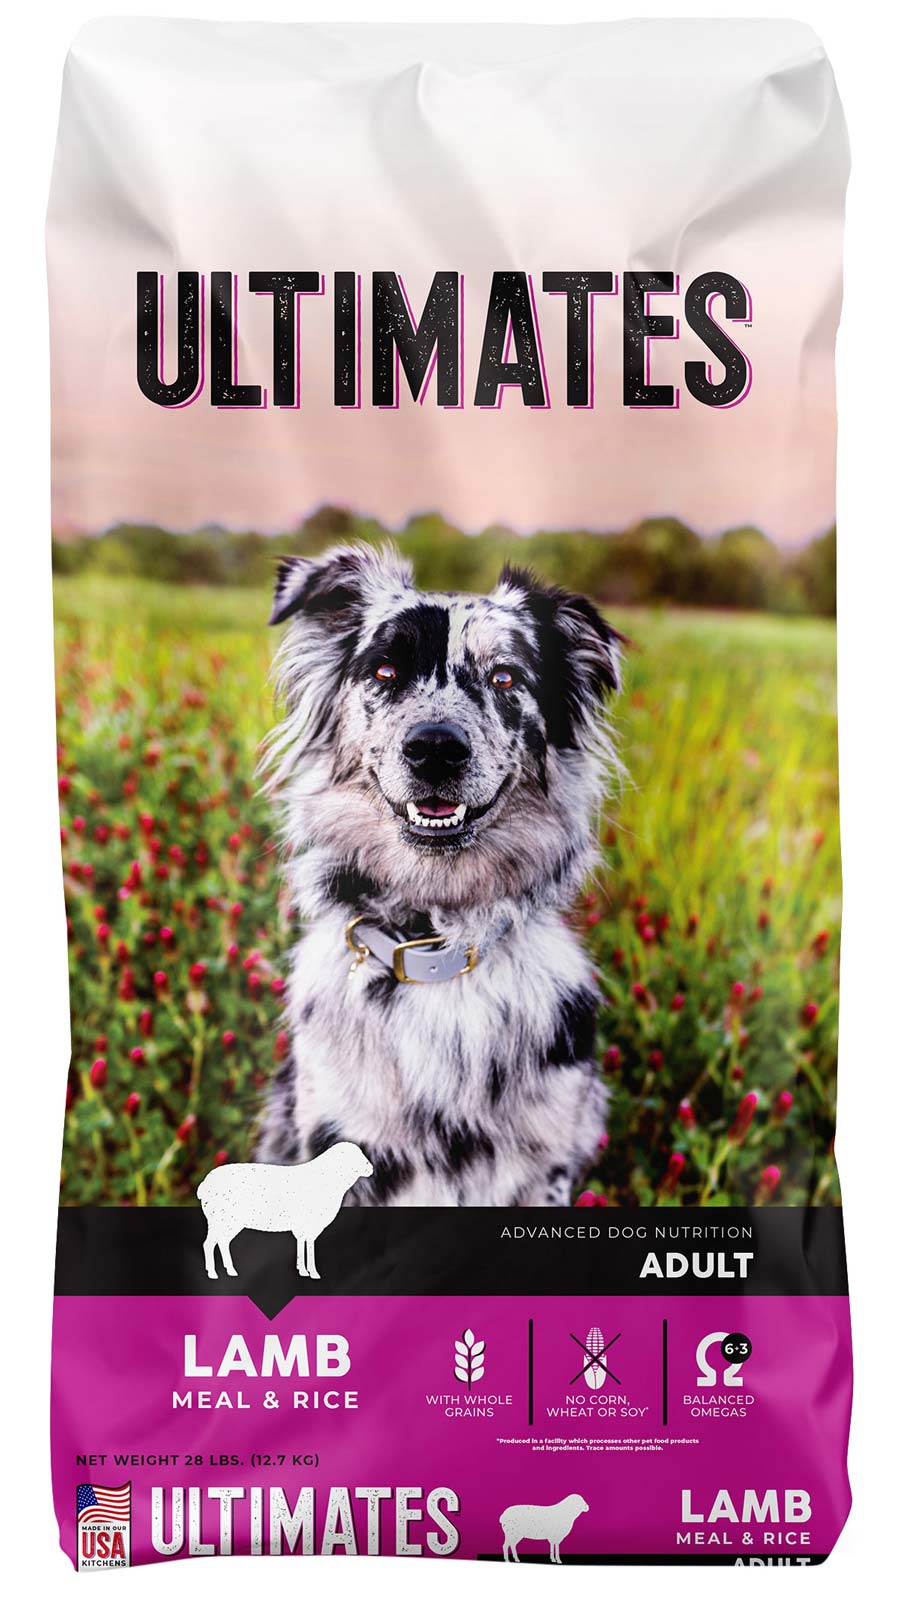 Ultimates Lamb Meal & Rice Dry Dog Food, 28 Pounds